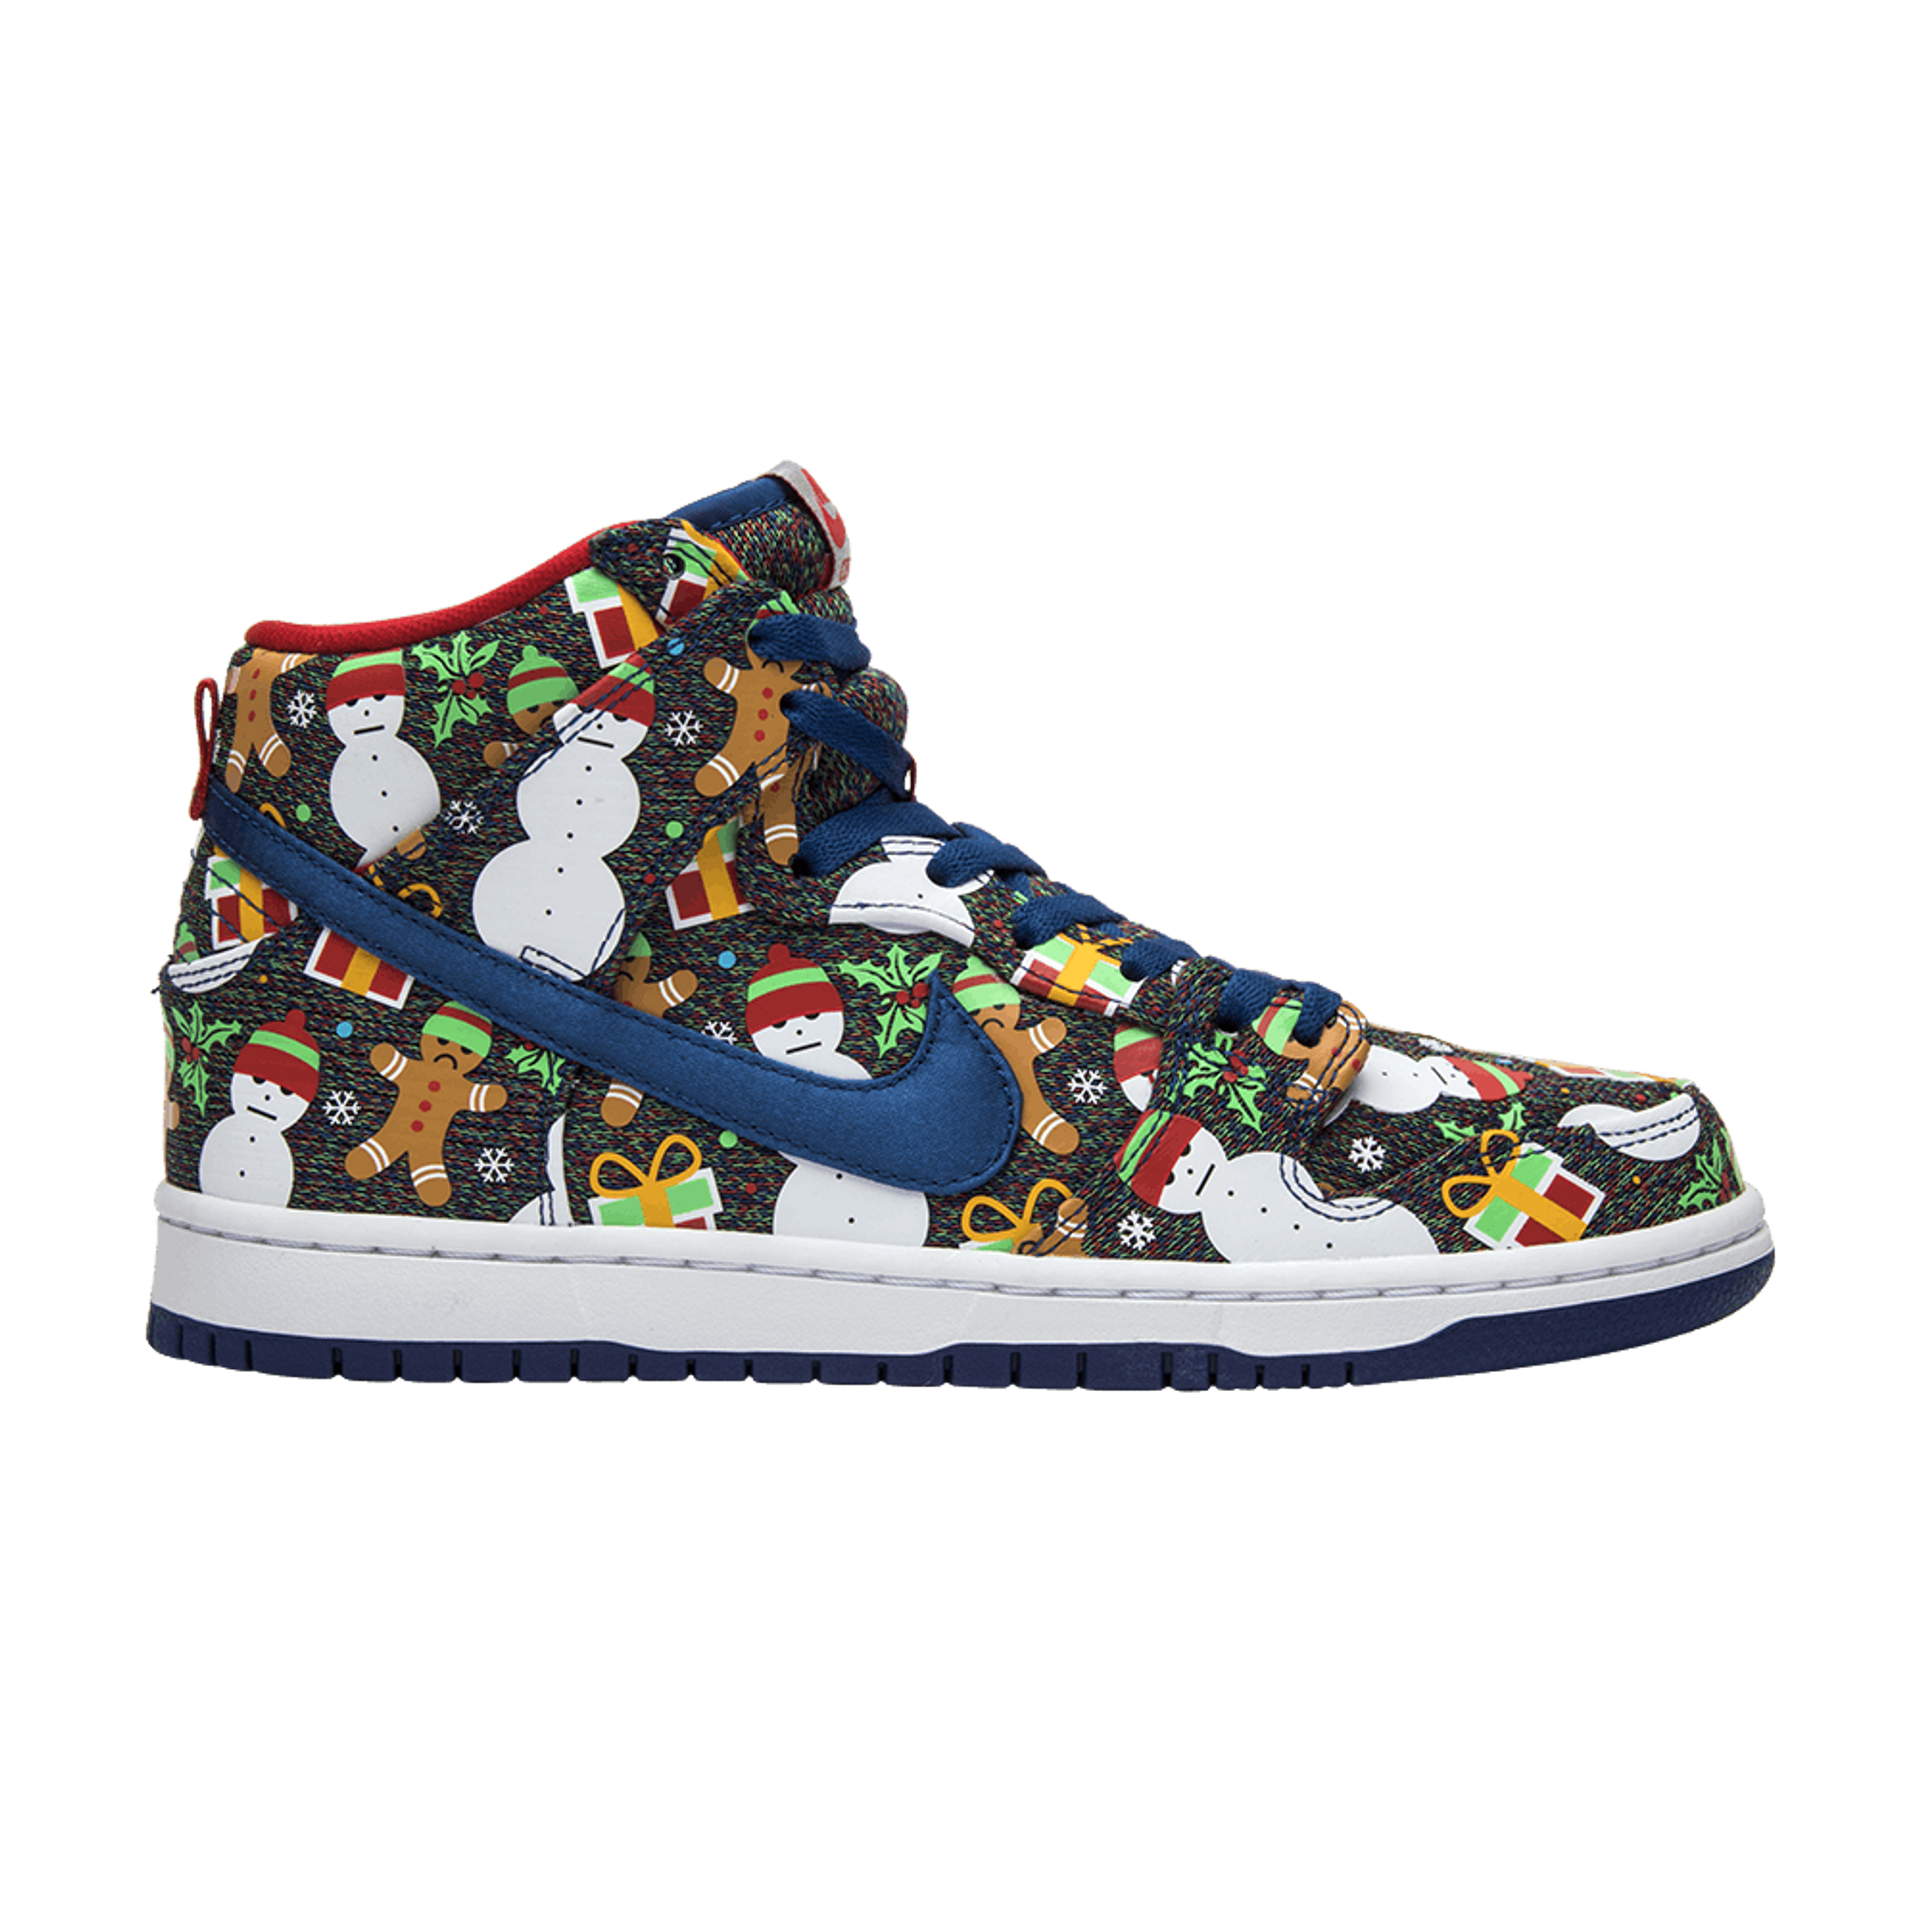 Nike Concepts x SB Dunk Pro High 'Ugly Christmas Sweater' 2017